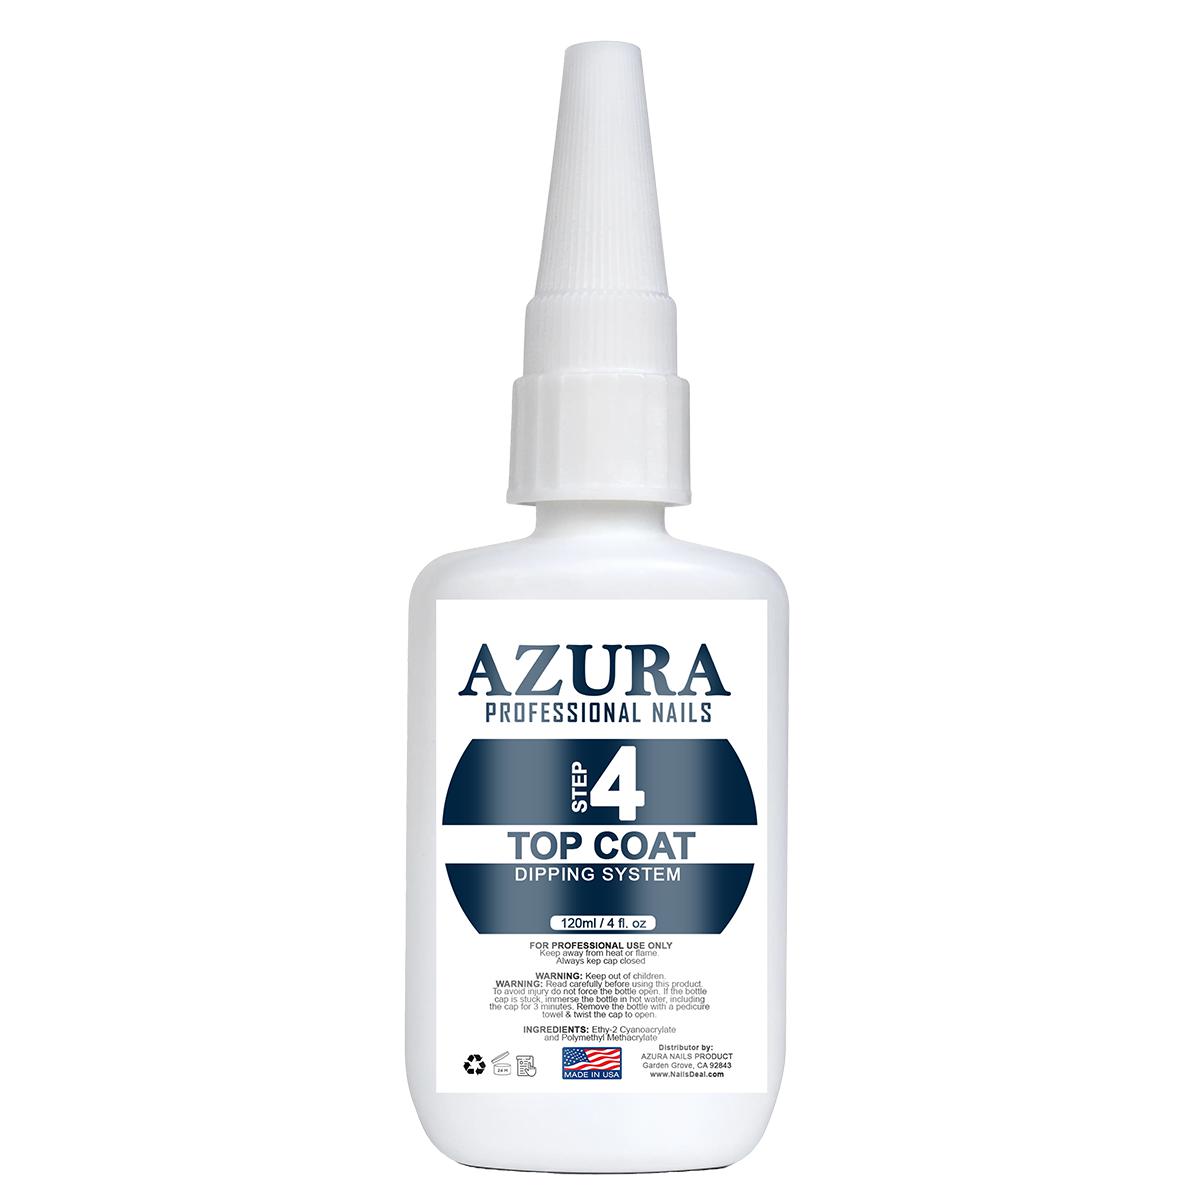 AZURA Dipping Essential - Top Dip - Refill (4oz/120ml) for Dipping Manicures-AZURA- Nail Supply American Gel Polish - Phuong Ni